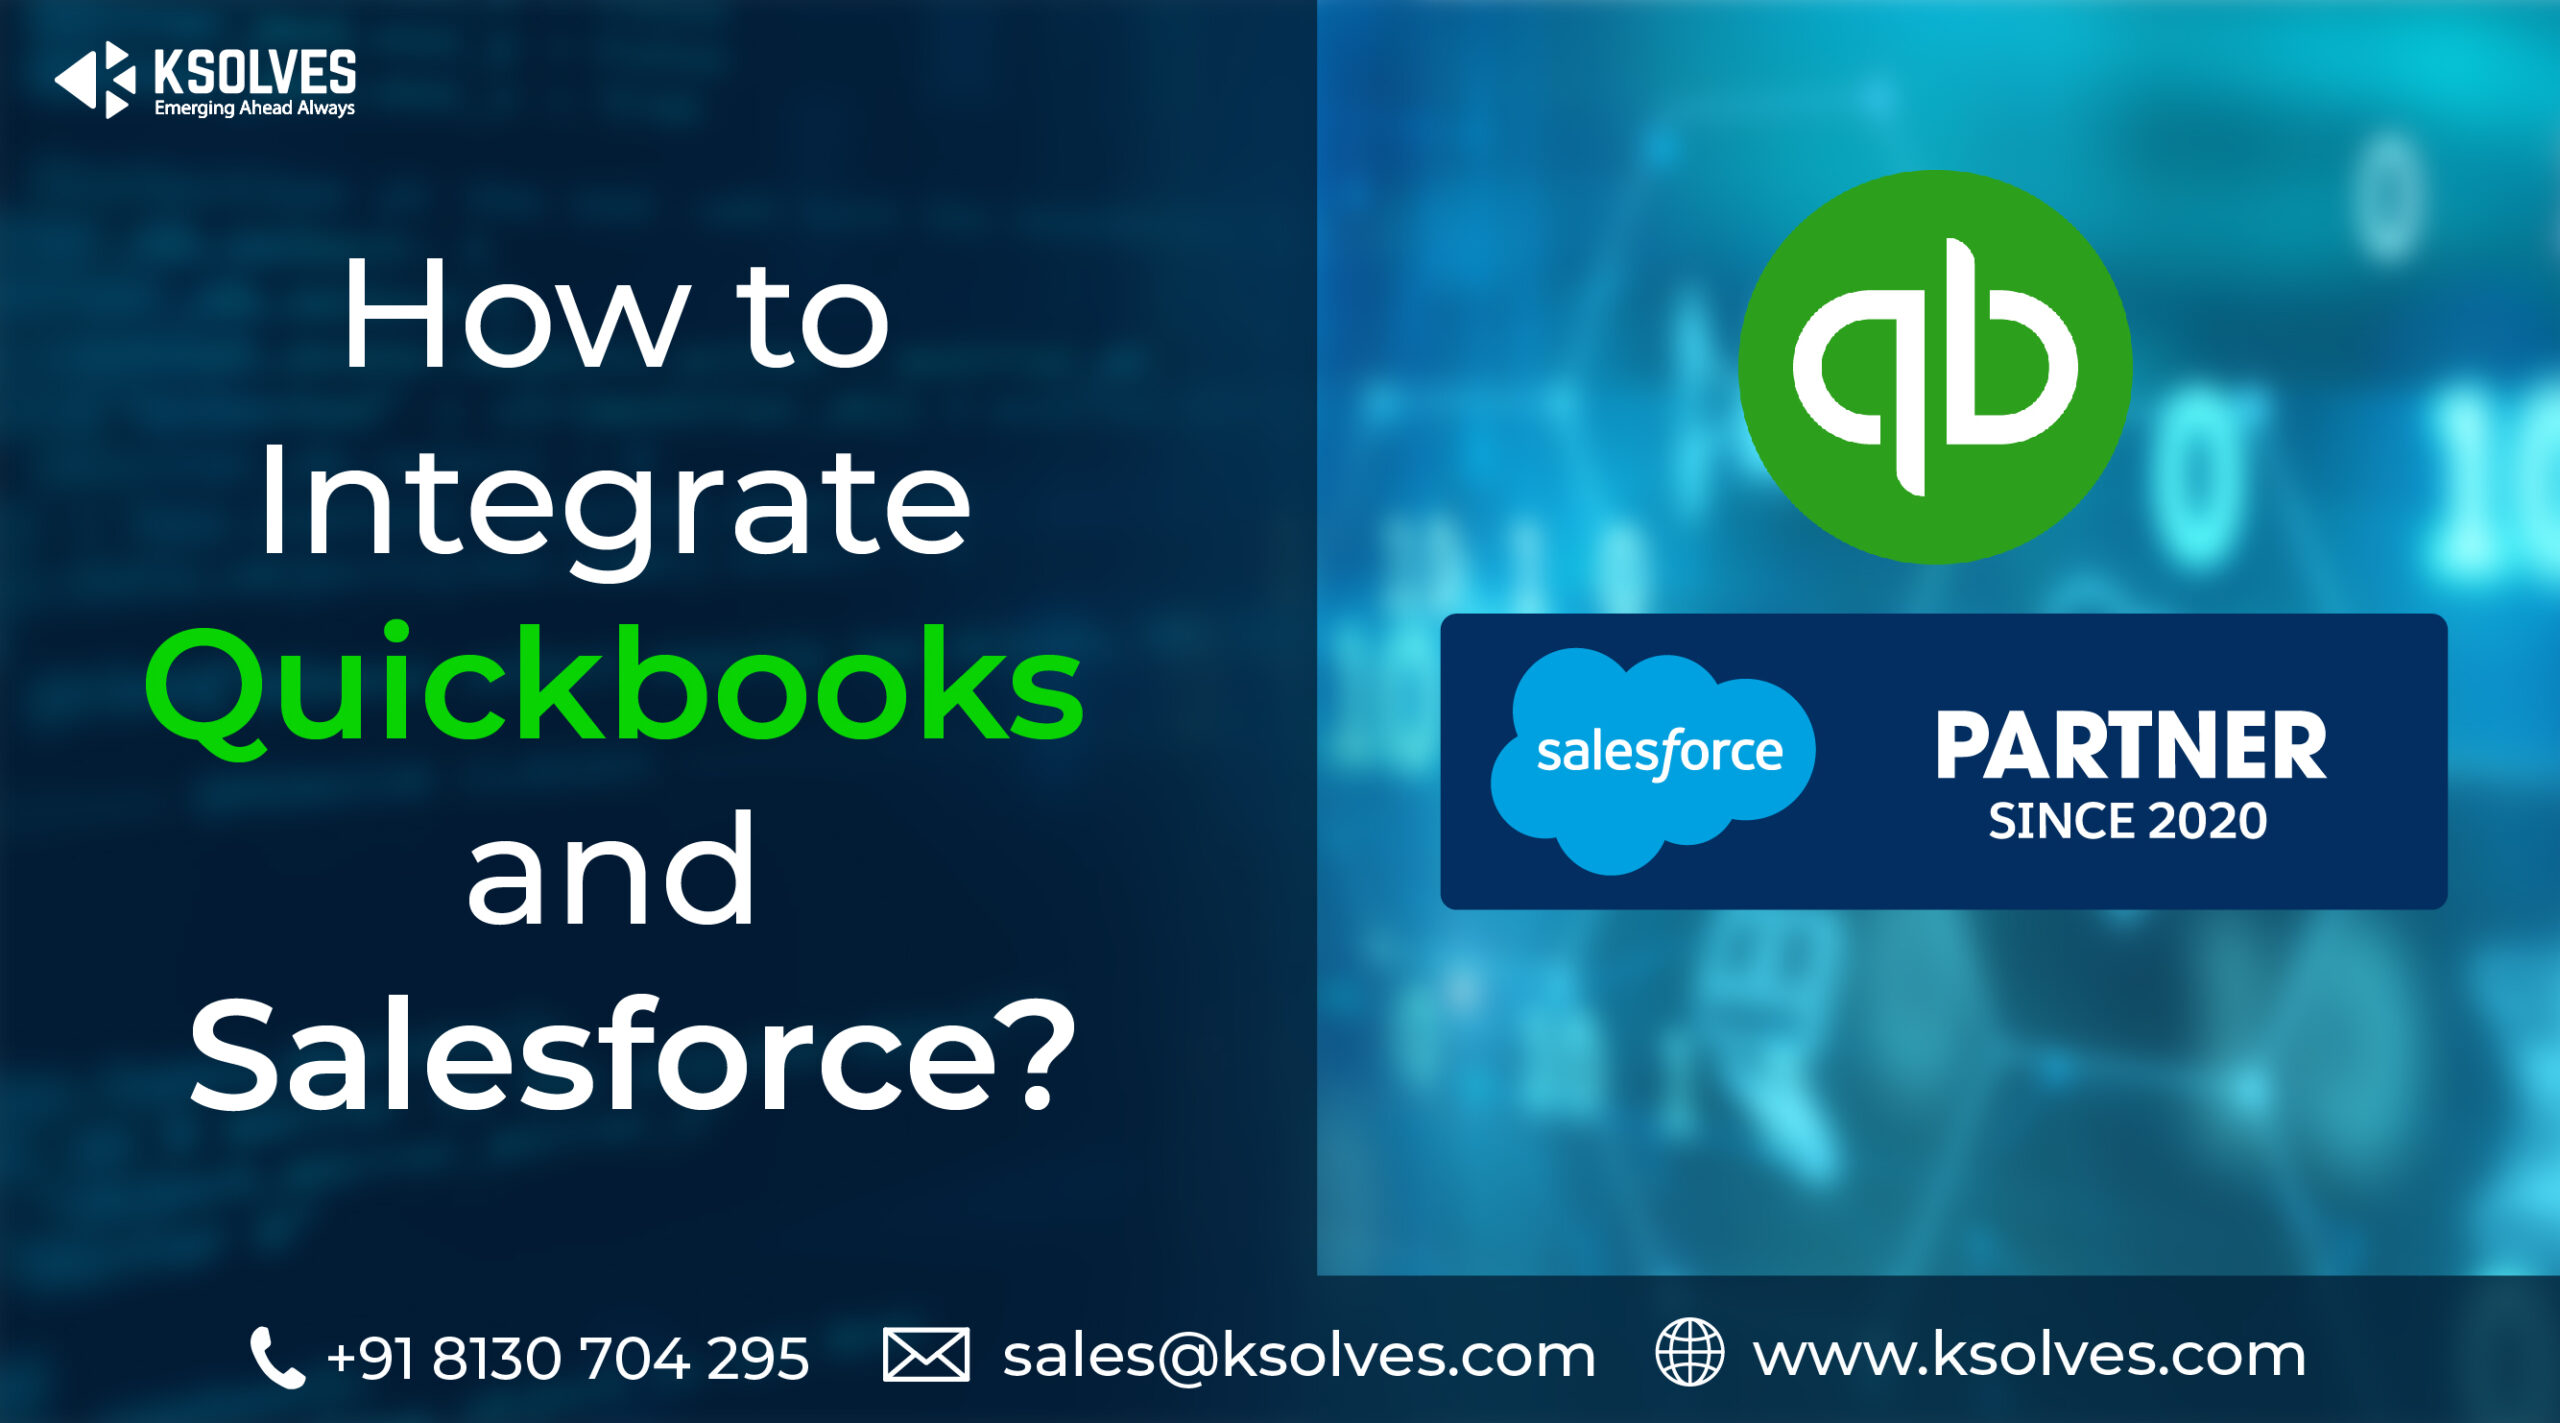 How to Integrate Quickbooks and Salesforce?